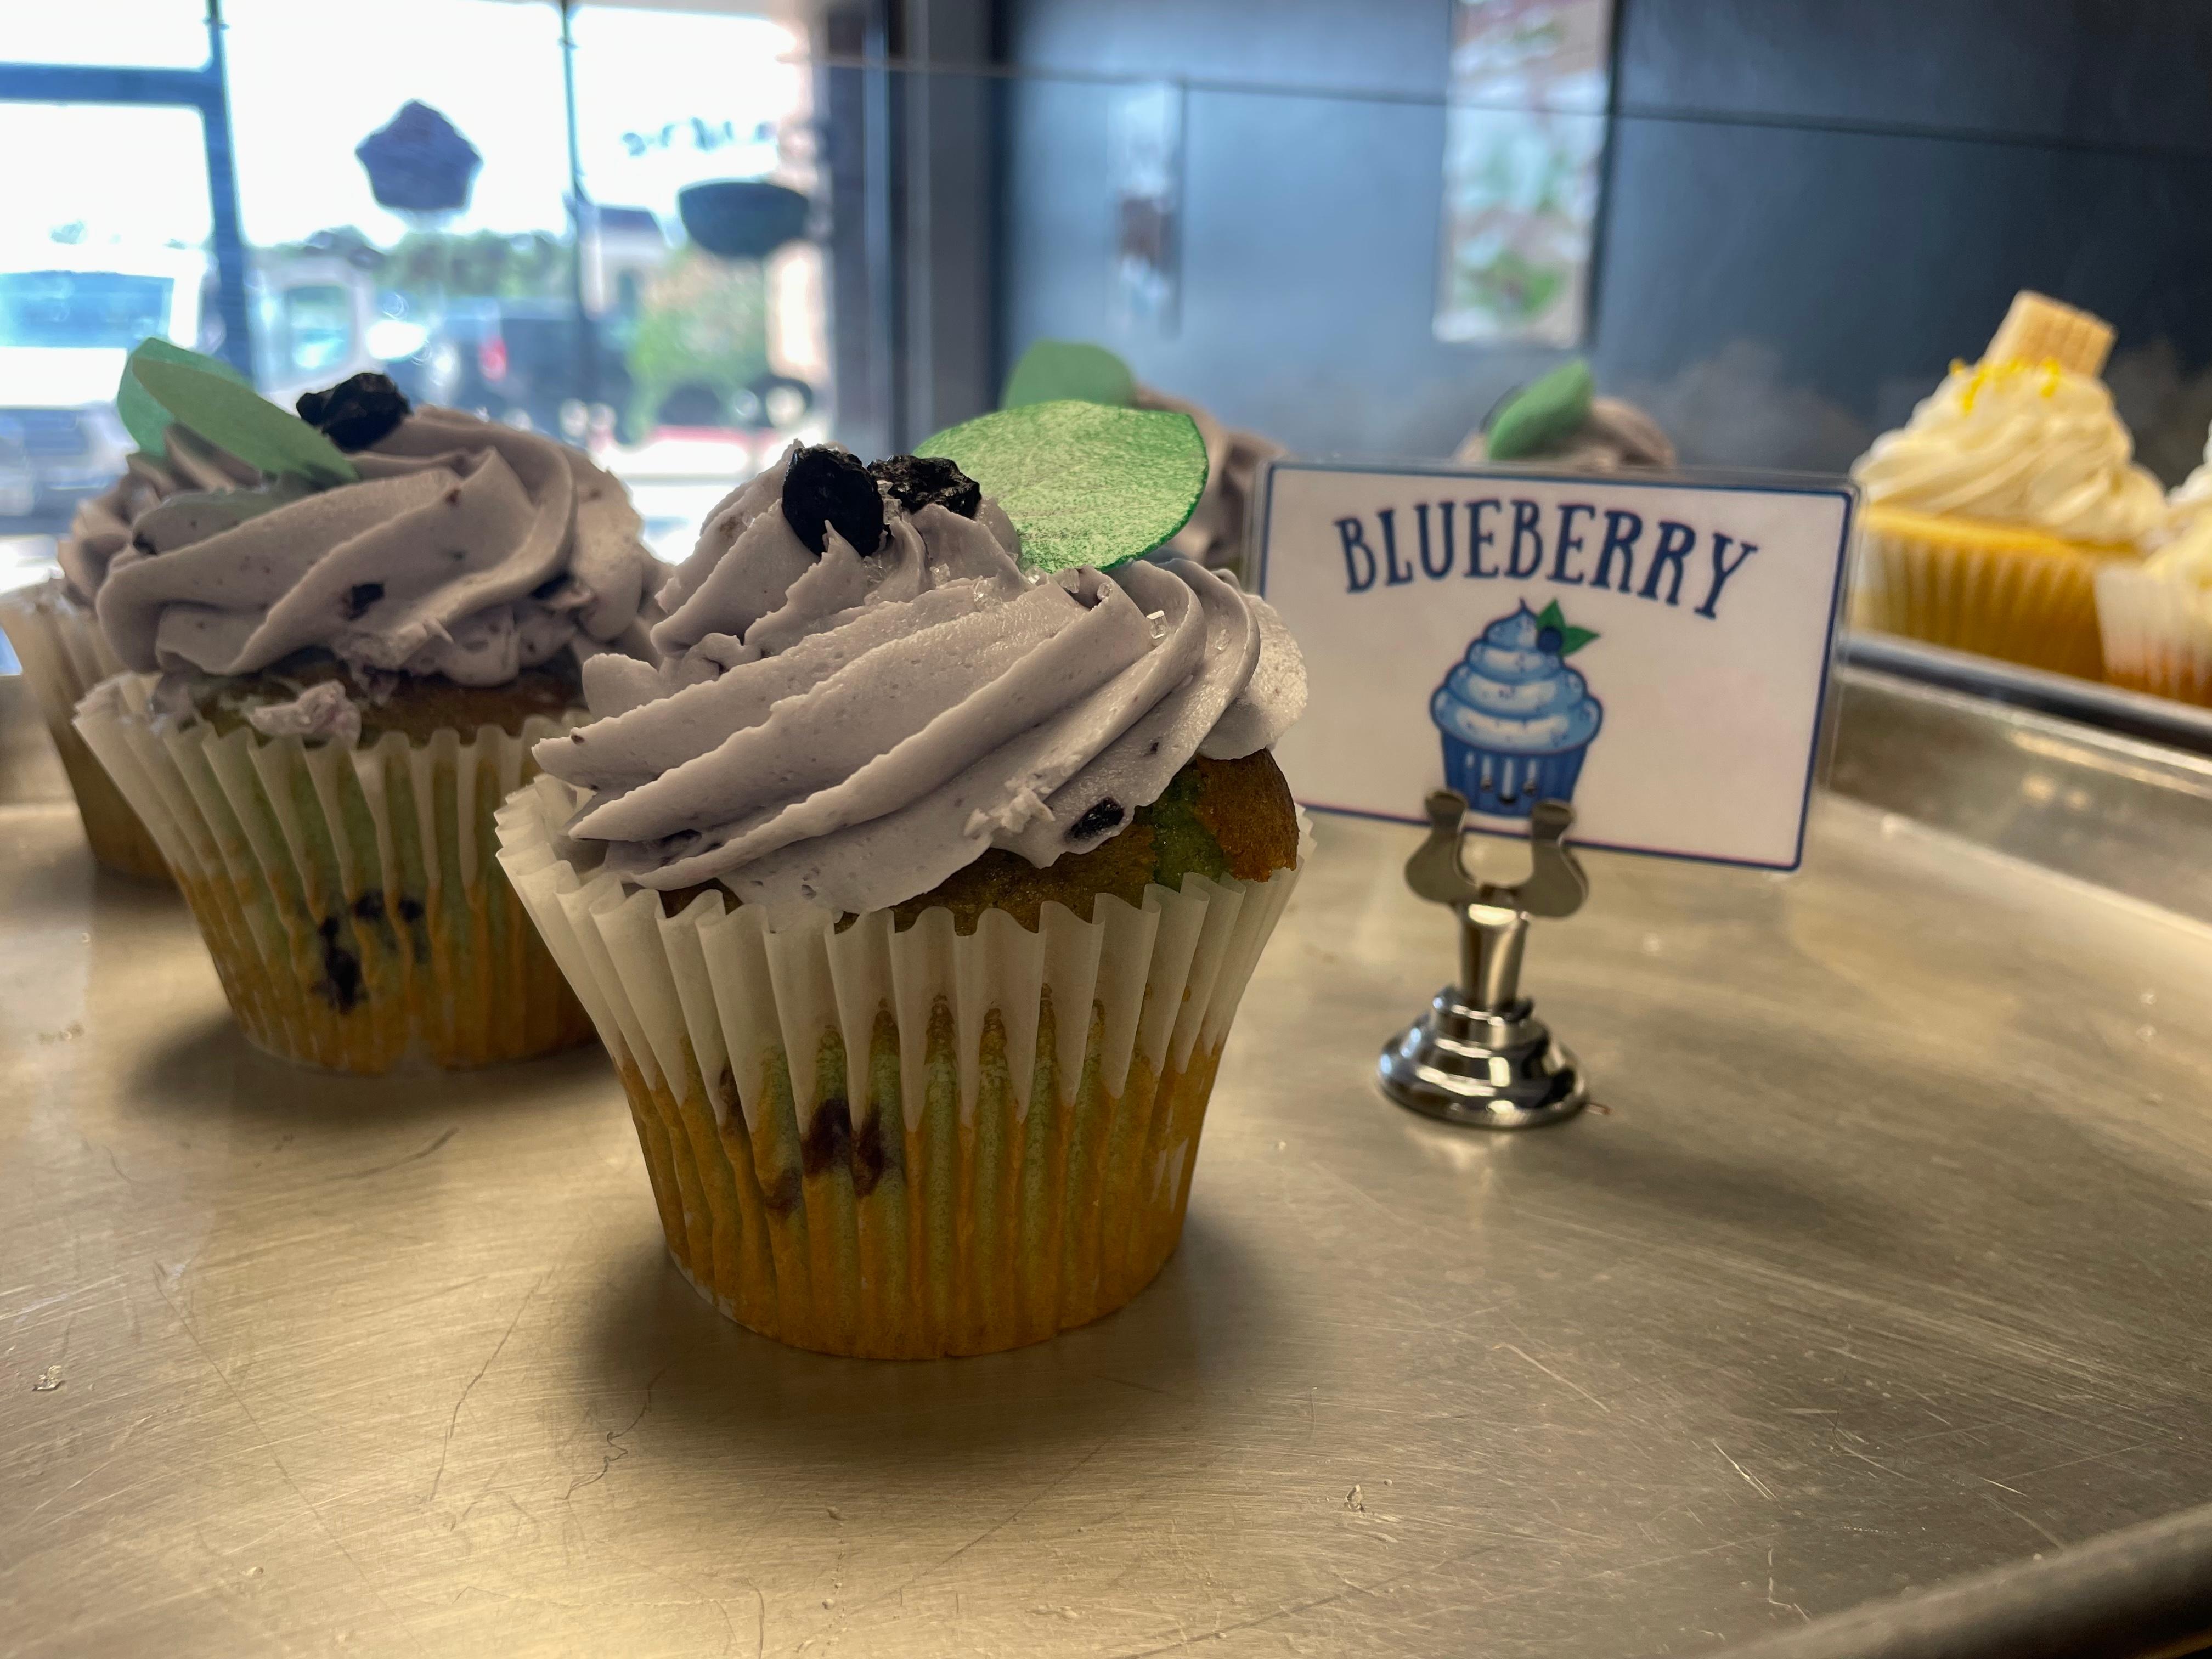 One of our top sellers, the classic Blueberry!  Made with real blueberries in the batter!